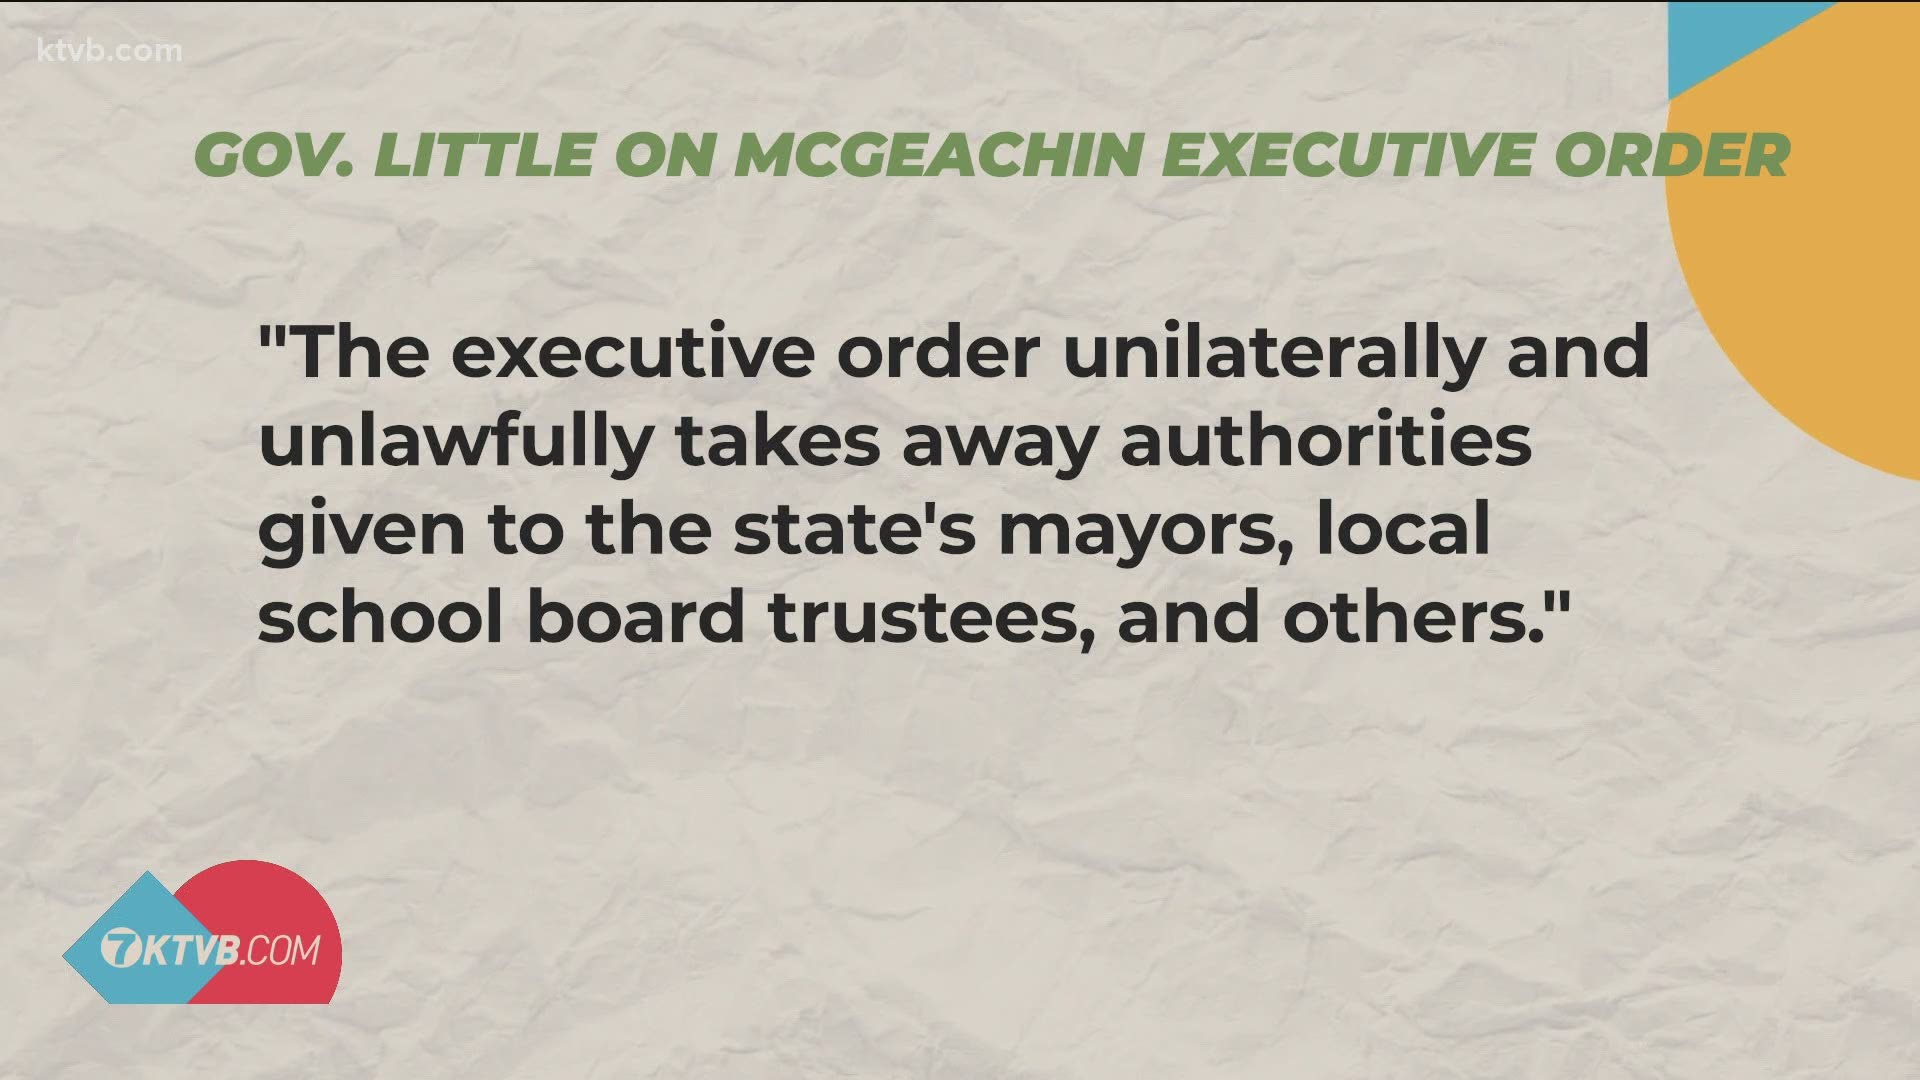 The governor called Lt. Gov. Janice McGeachin's executive order "an irresponsible, self-serving political stunt" that subverted the decisions of local officials.